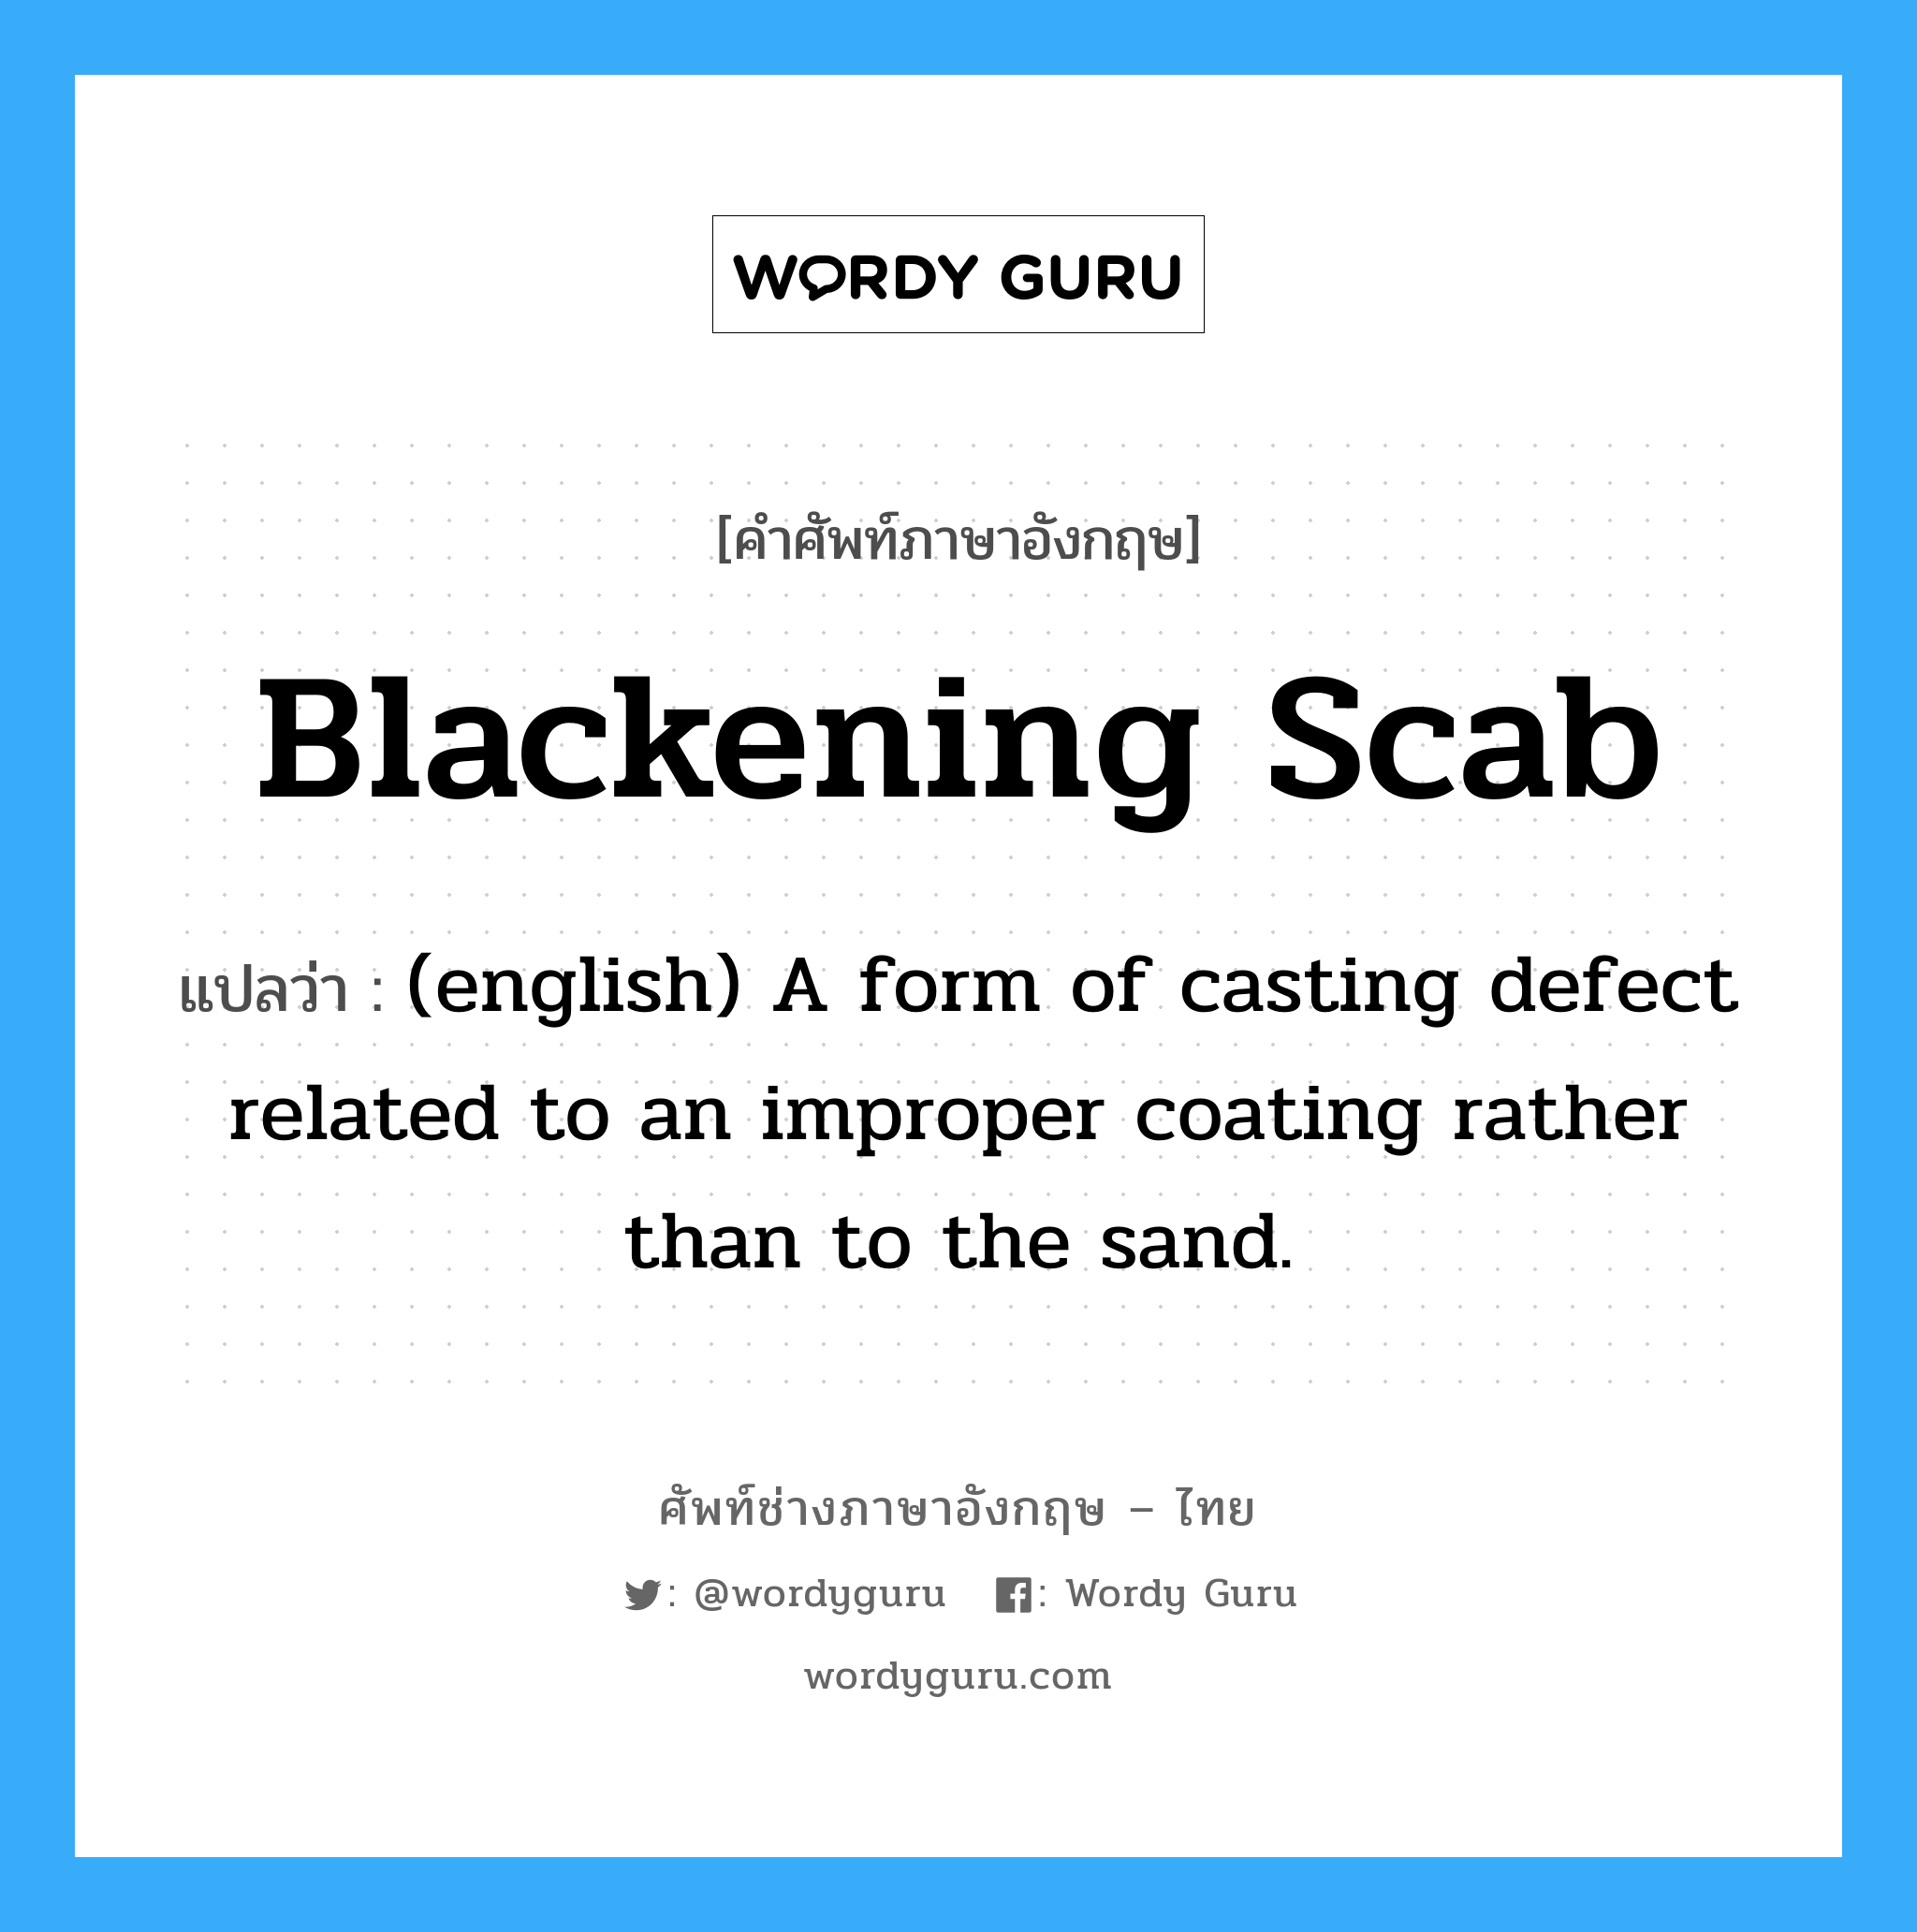 (english) A form of casting defect related to an improper coating rather than to the sand. ภาษาอังกฤษ?, คำศัพท์ช่างภาษาอังกฤษ - ไทย (english) A form of casting defect related to an improper coating rather than to the sand. คำศัพท์ภาษาอังกฤษ (english) A form of casting defect related to an improper coating rather than to the sand. แปลว่า Blackening Scab